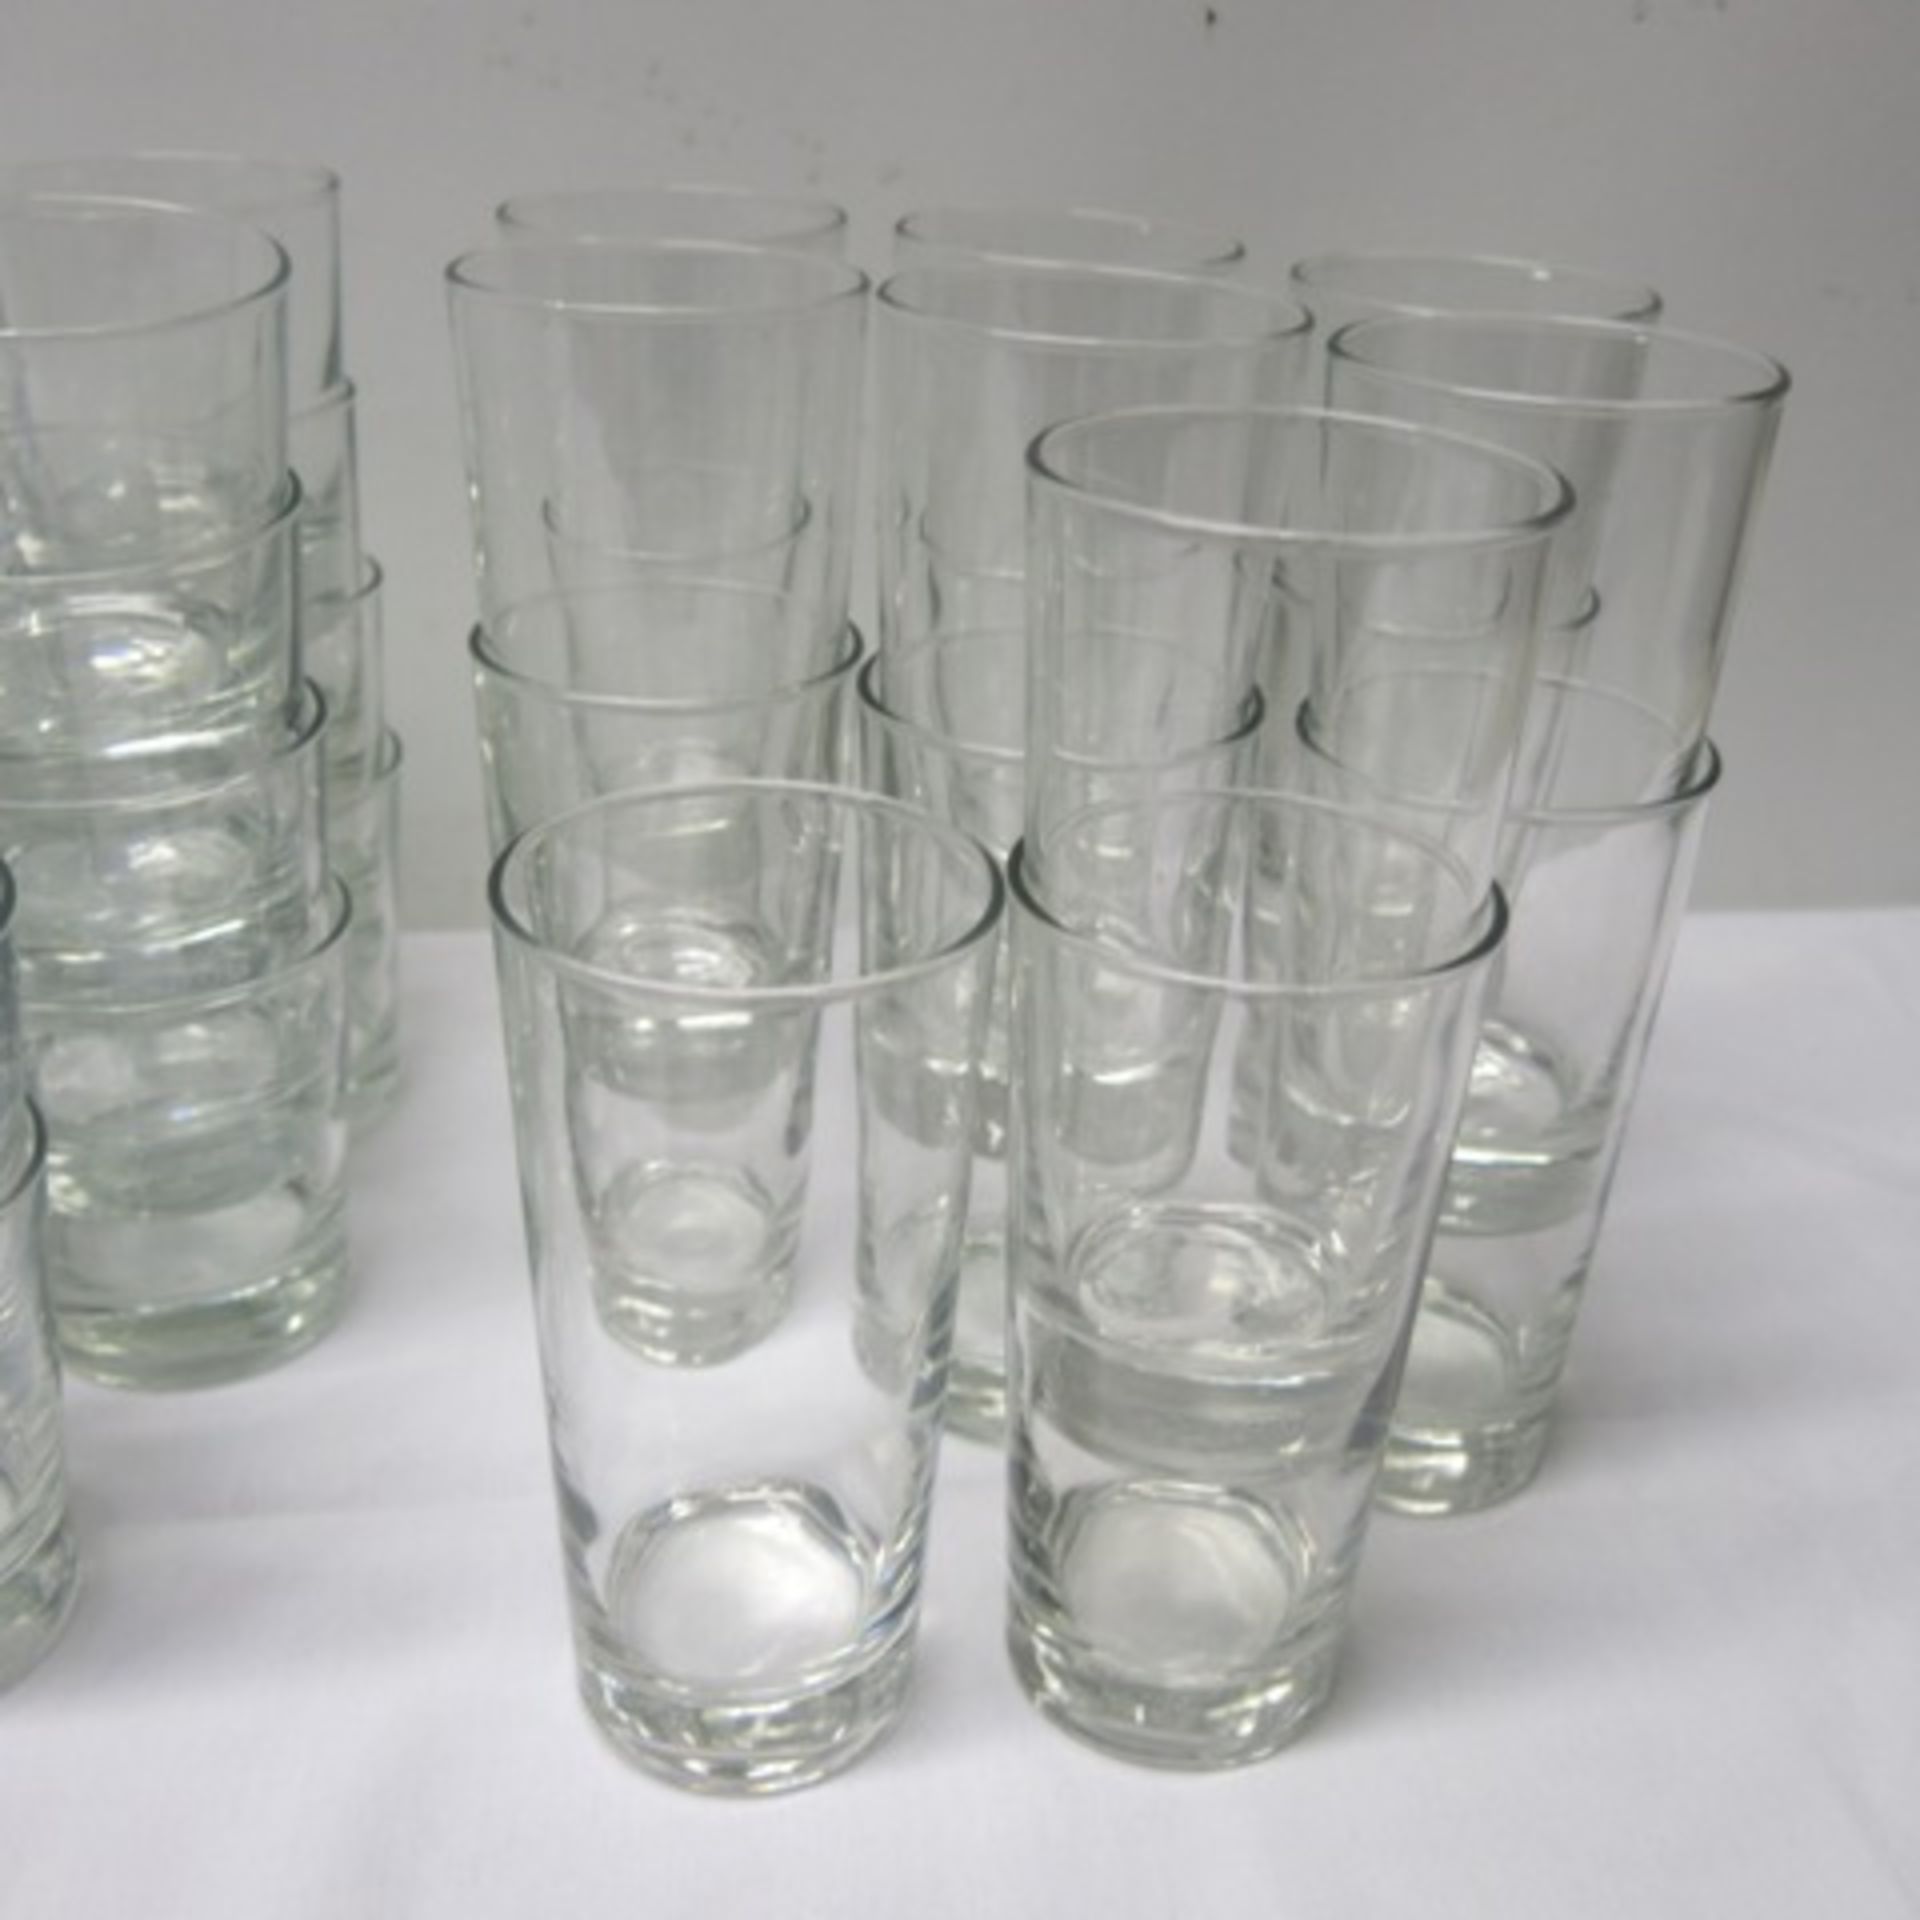 Lot of Restaurant Glasses to Include: 12 x Beer Glasses, 15 x Large Glasses & 31 x Tumbler Glasses - Image 4 of 5